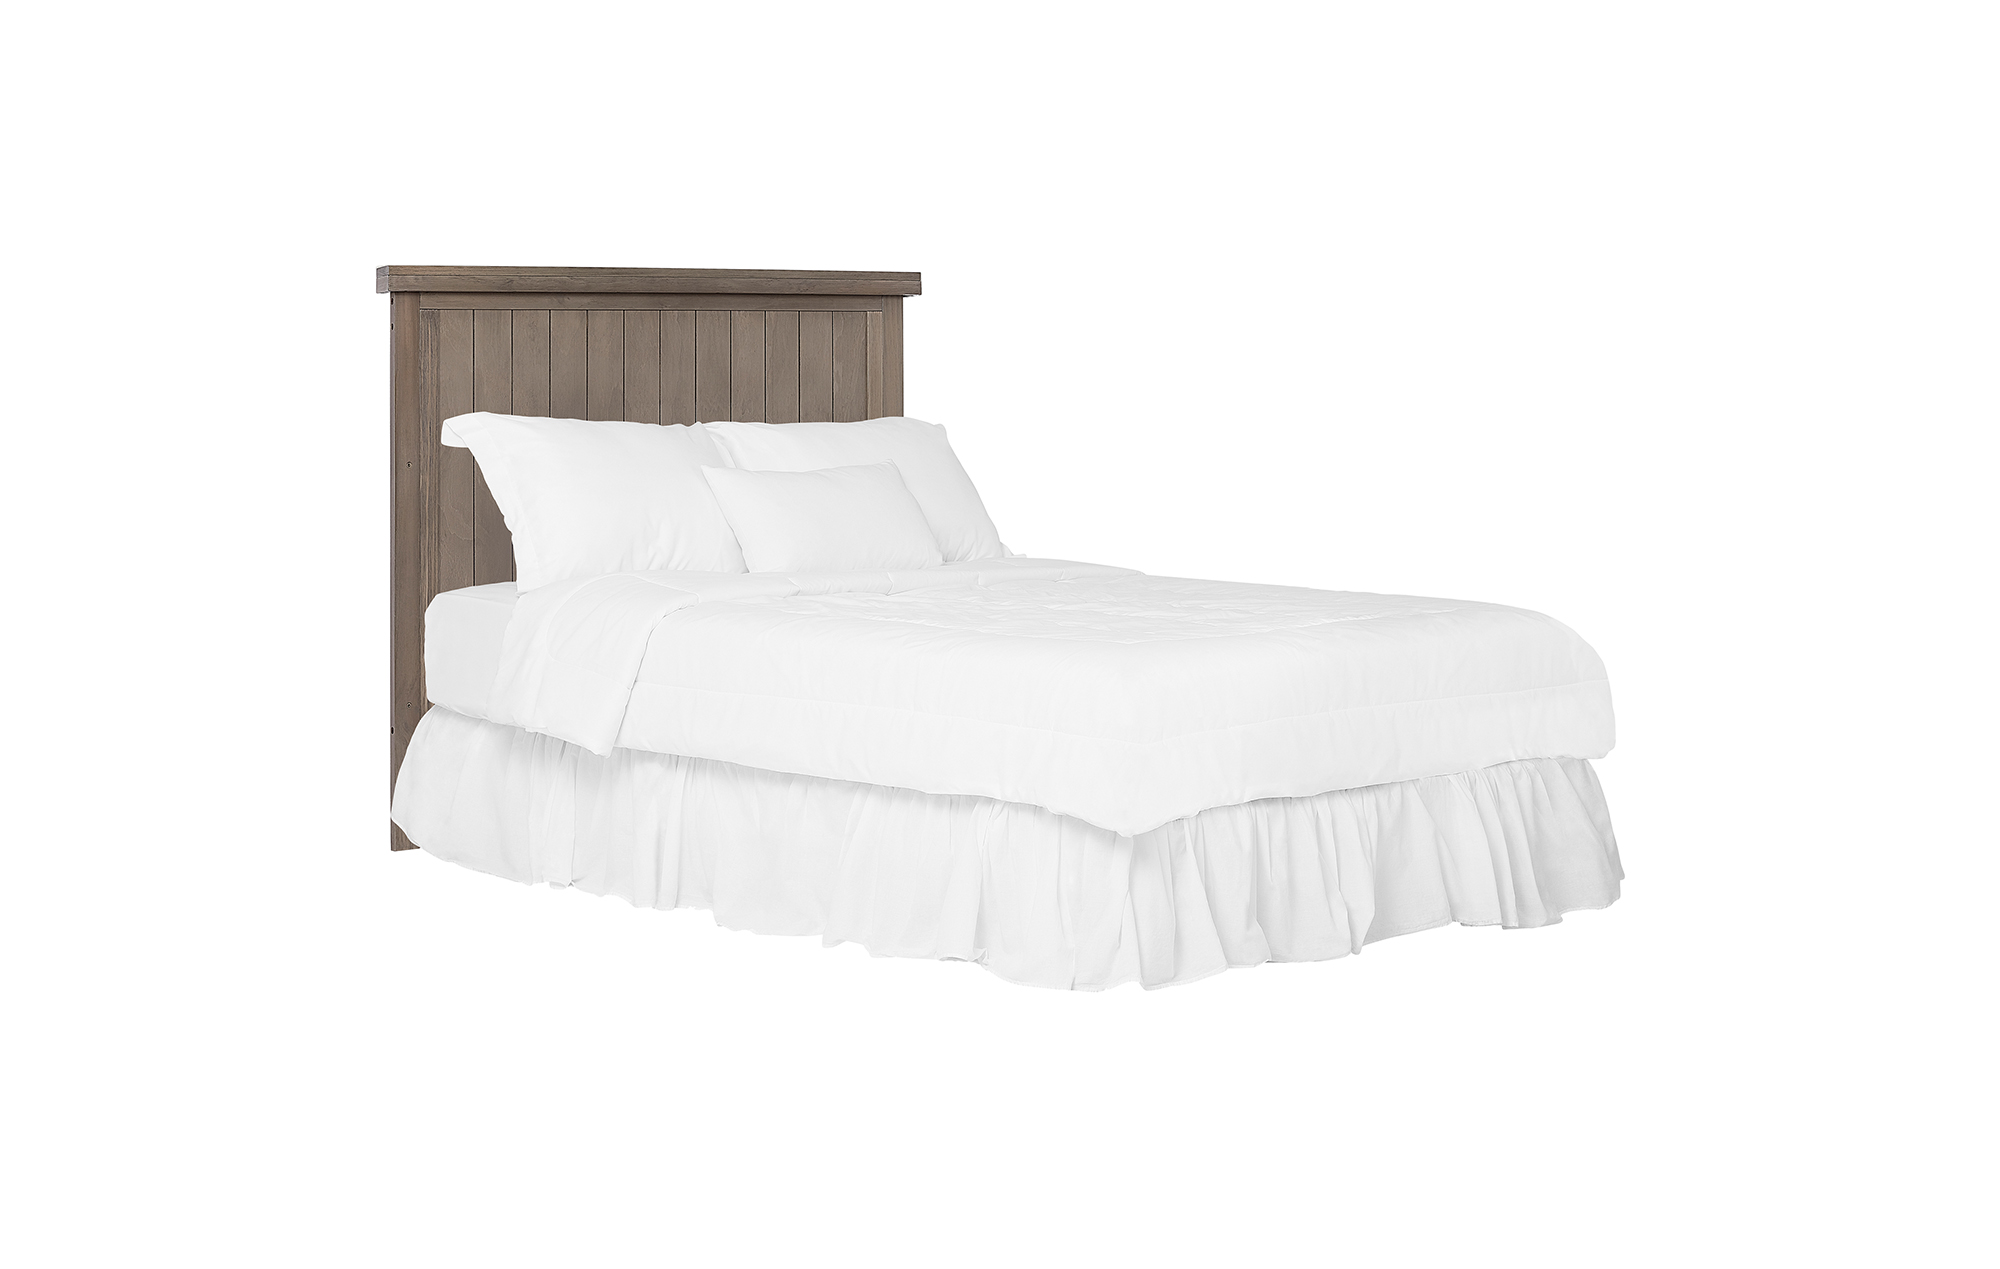 772BR-OAKGY Maple Full Size Bed without Headboard